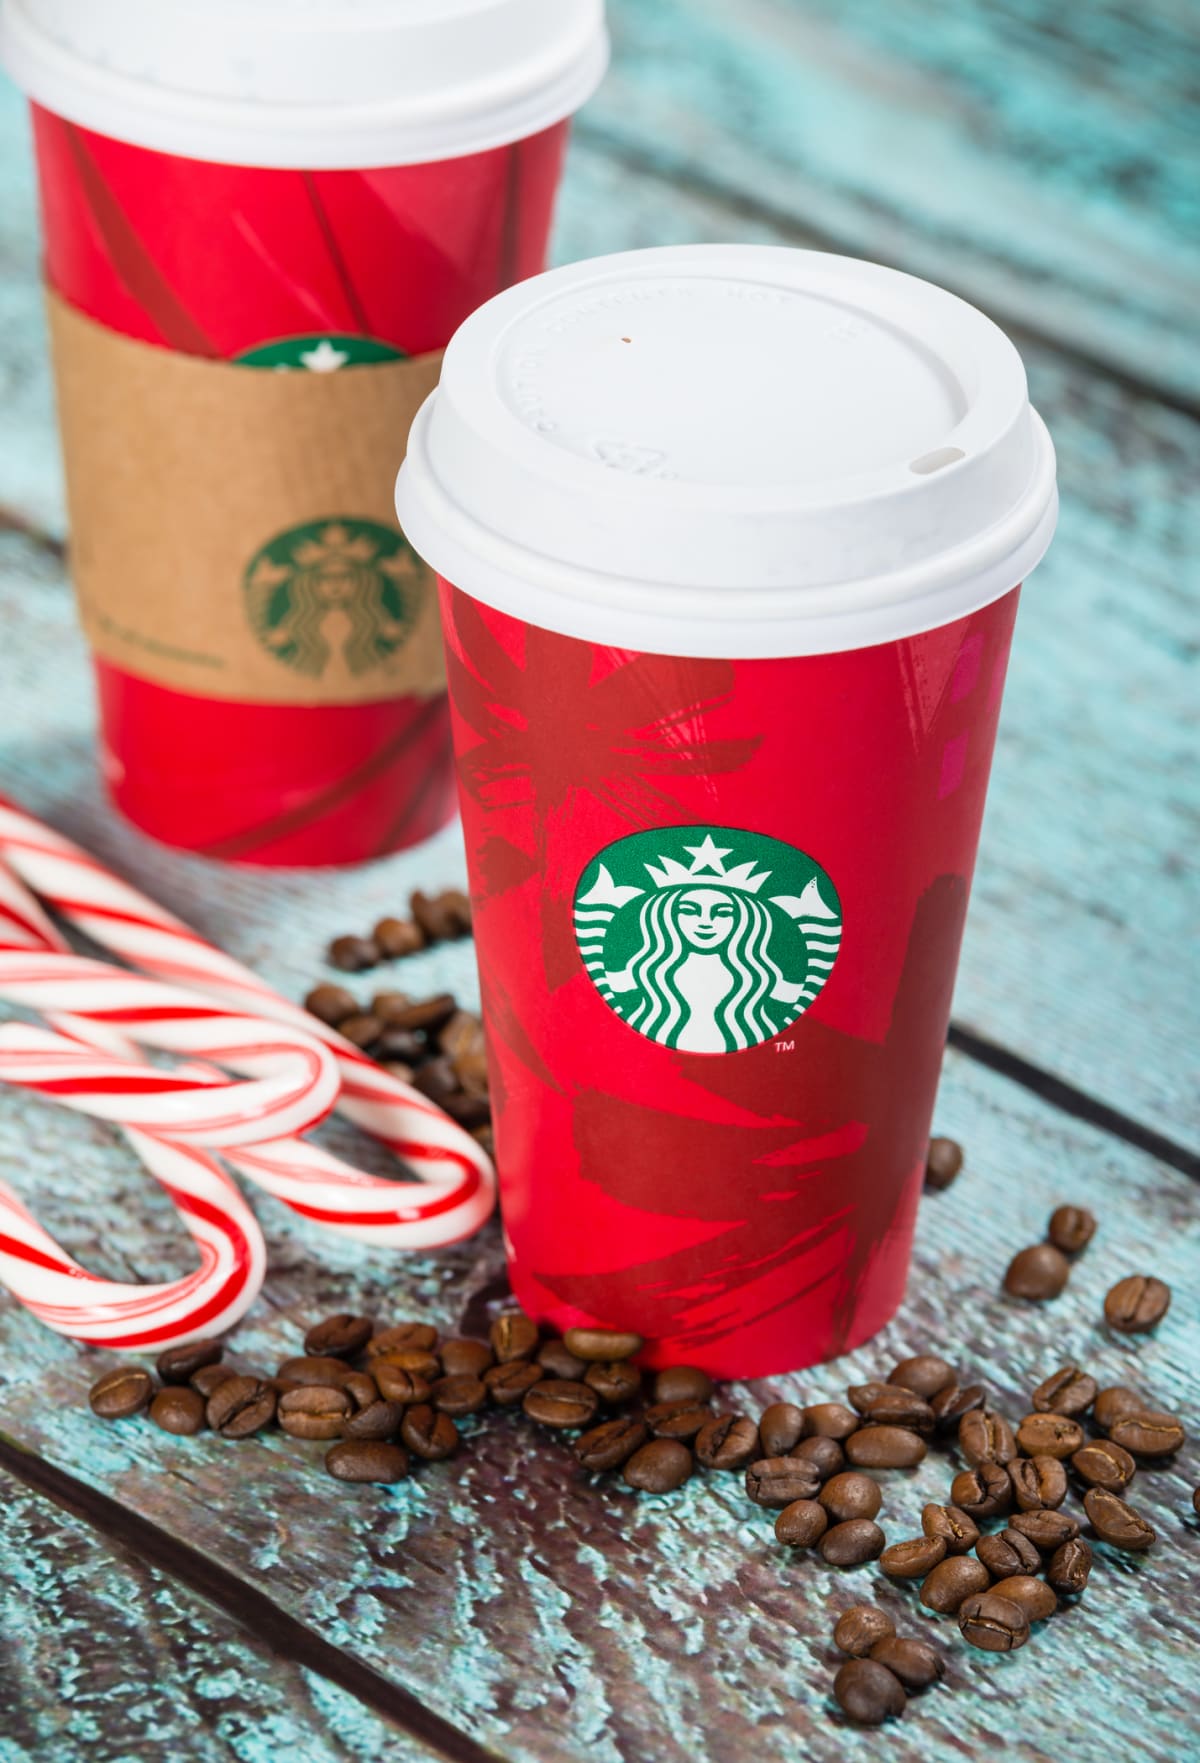 A cup of Starbucks popular holiday beverage, peppermint mocha, displayed with coffee beans and candy canes on wooden table. 